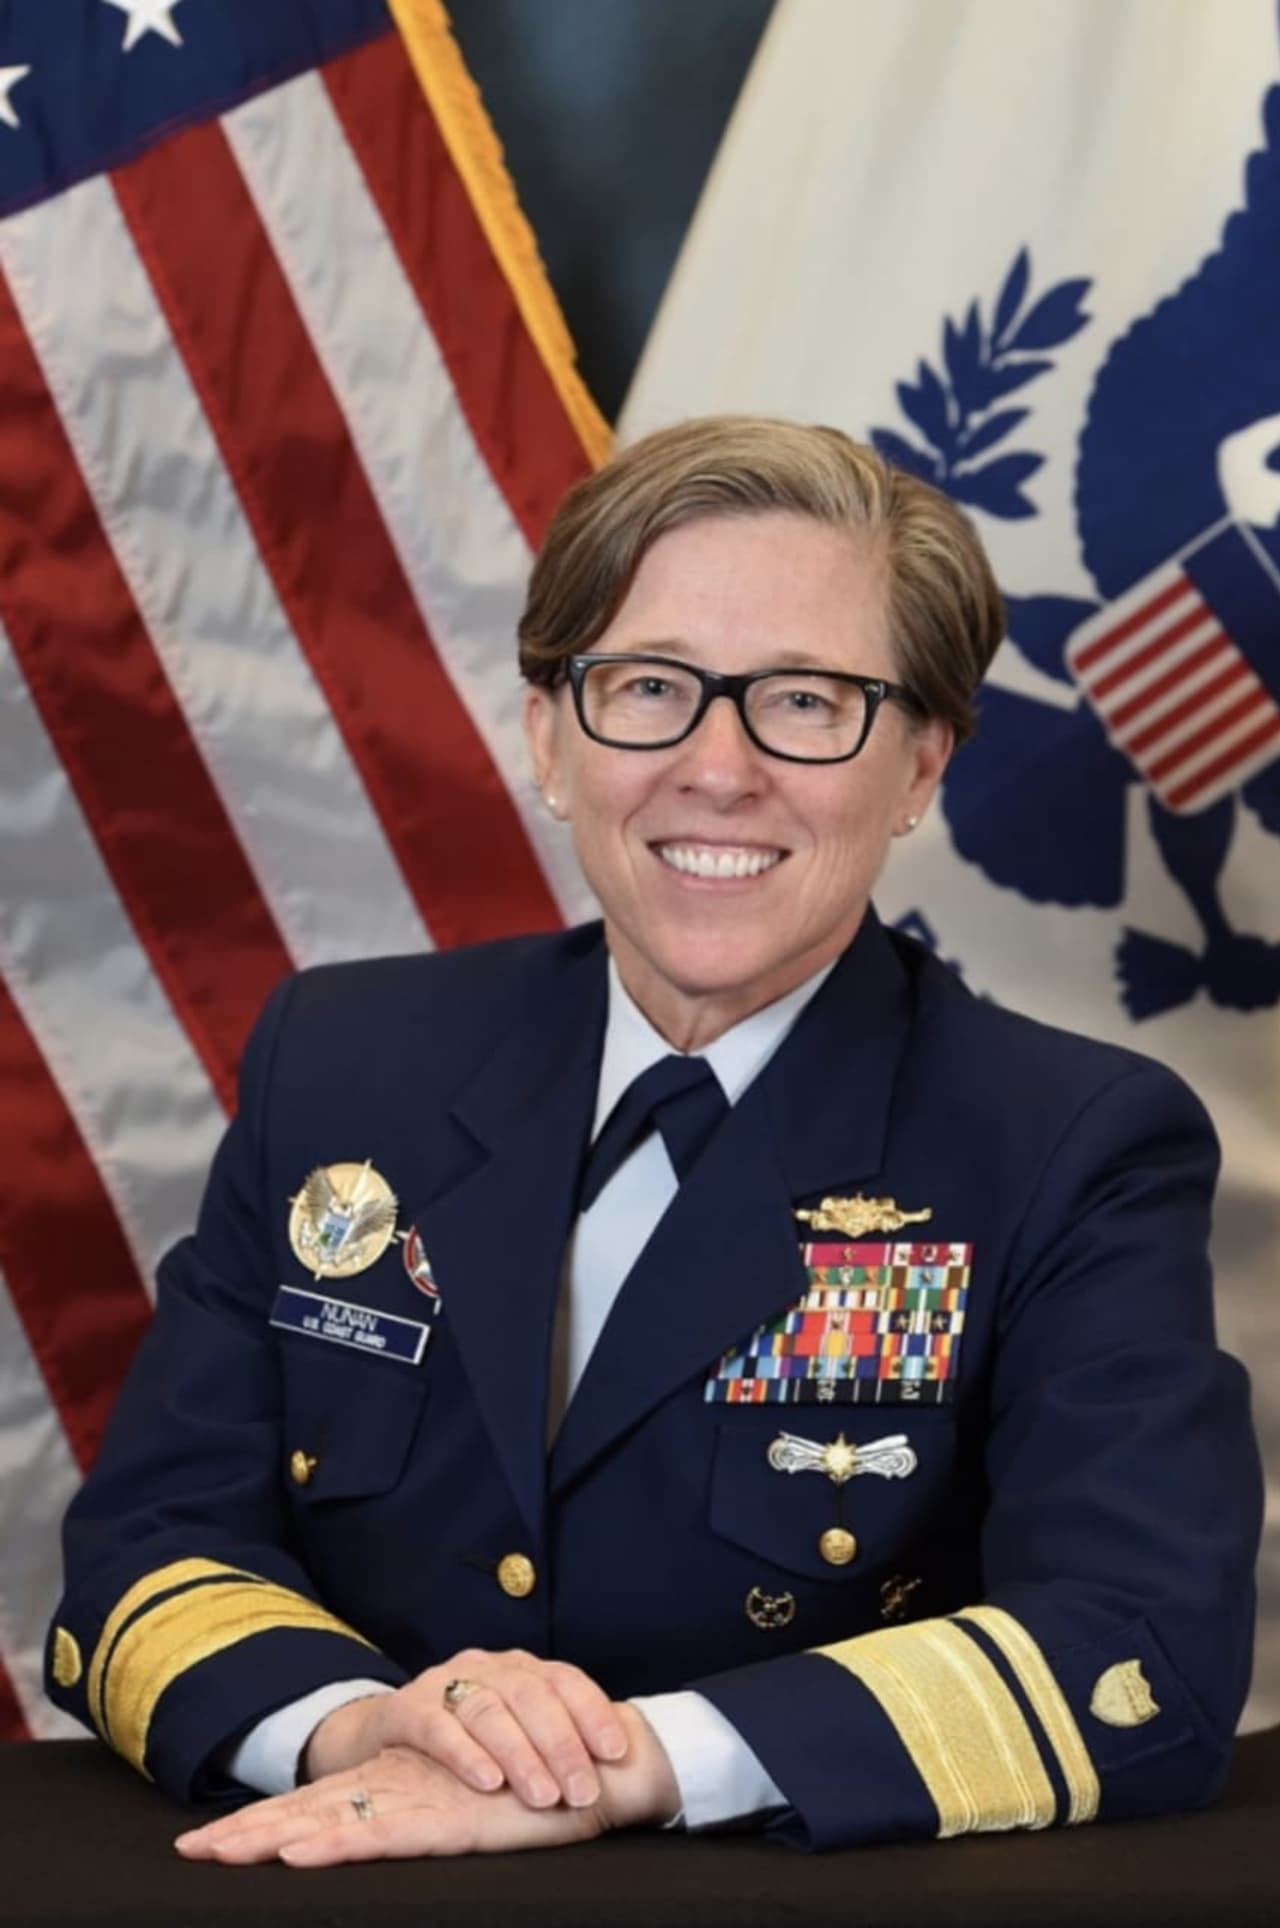 Rear Admiral Joanna Nunan, originally from Bridgeport, has been selected as the first female superintendent of the US Merchant Marine Academy.